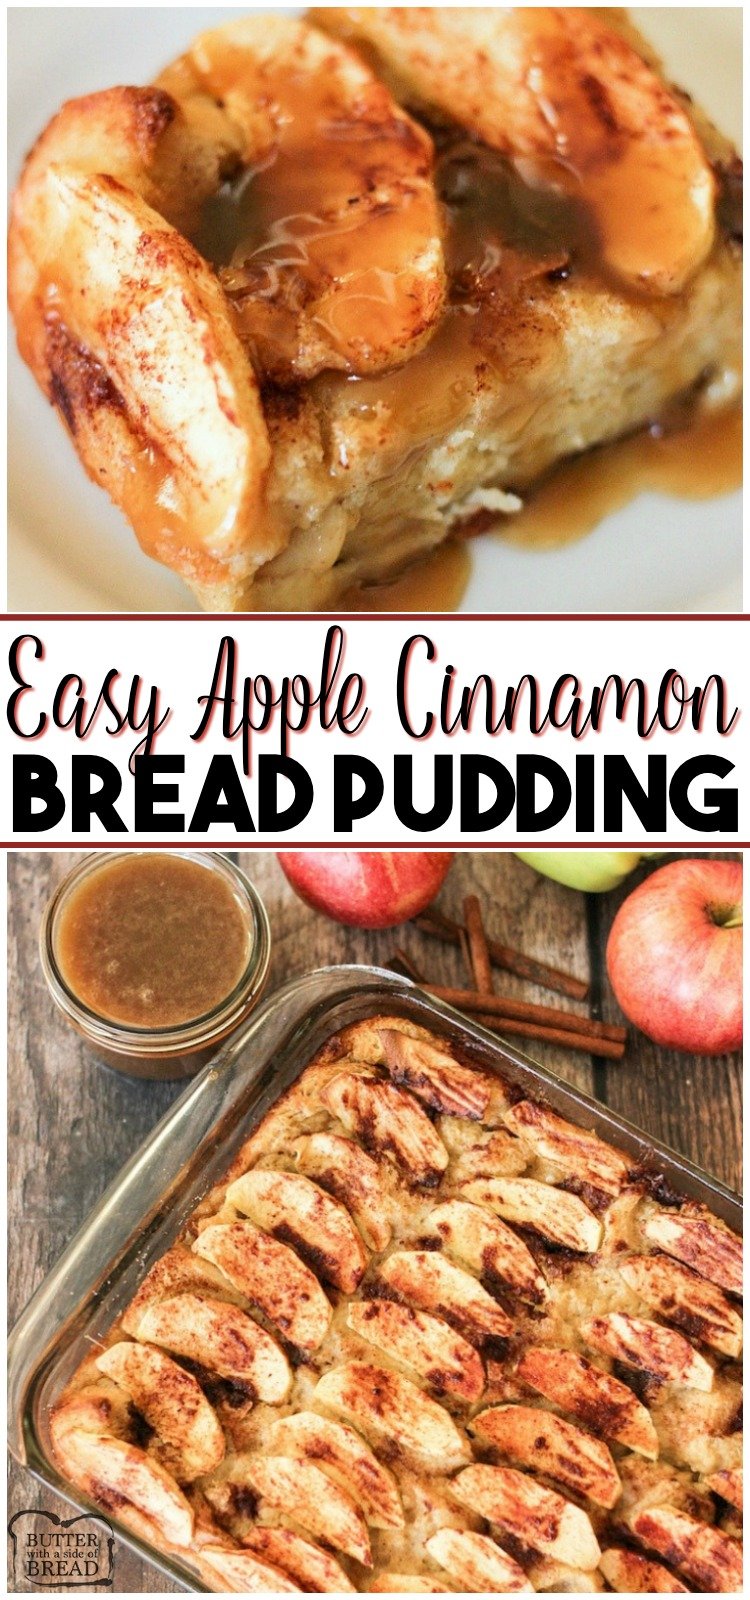 Caramel Apple Bread Pudding is a delicious dish made from sliced apples and bread combined with a spiced custard, baked and drizzled with caramel syrup. Lovely apple bread pudding recipe that everyone devours! #bread #pudding #dessert #breakfast #apple #cinnamon #caramel #breadpudding #recipe from BUTTER WITH A SIDE OF BREAD